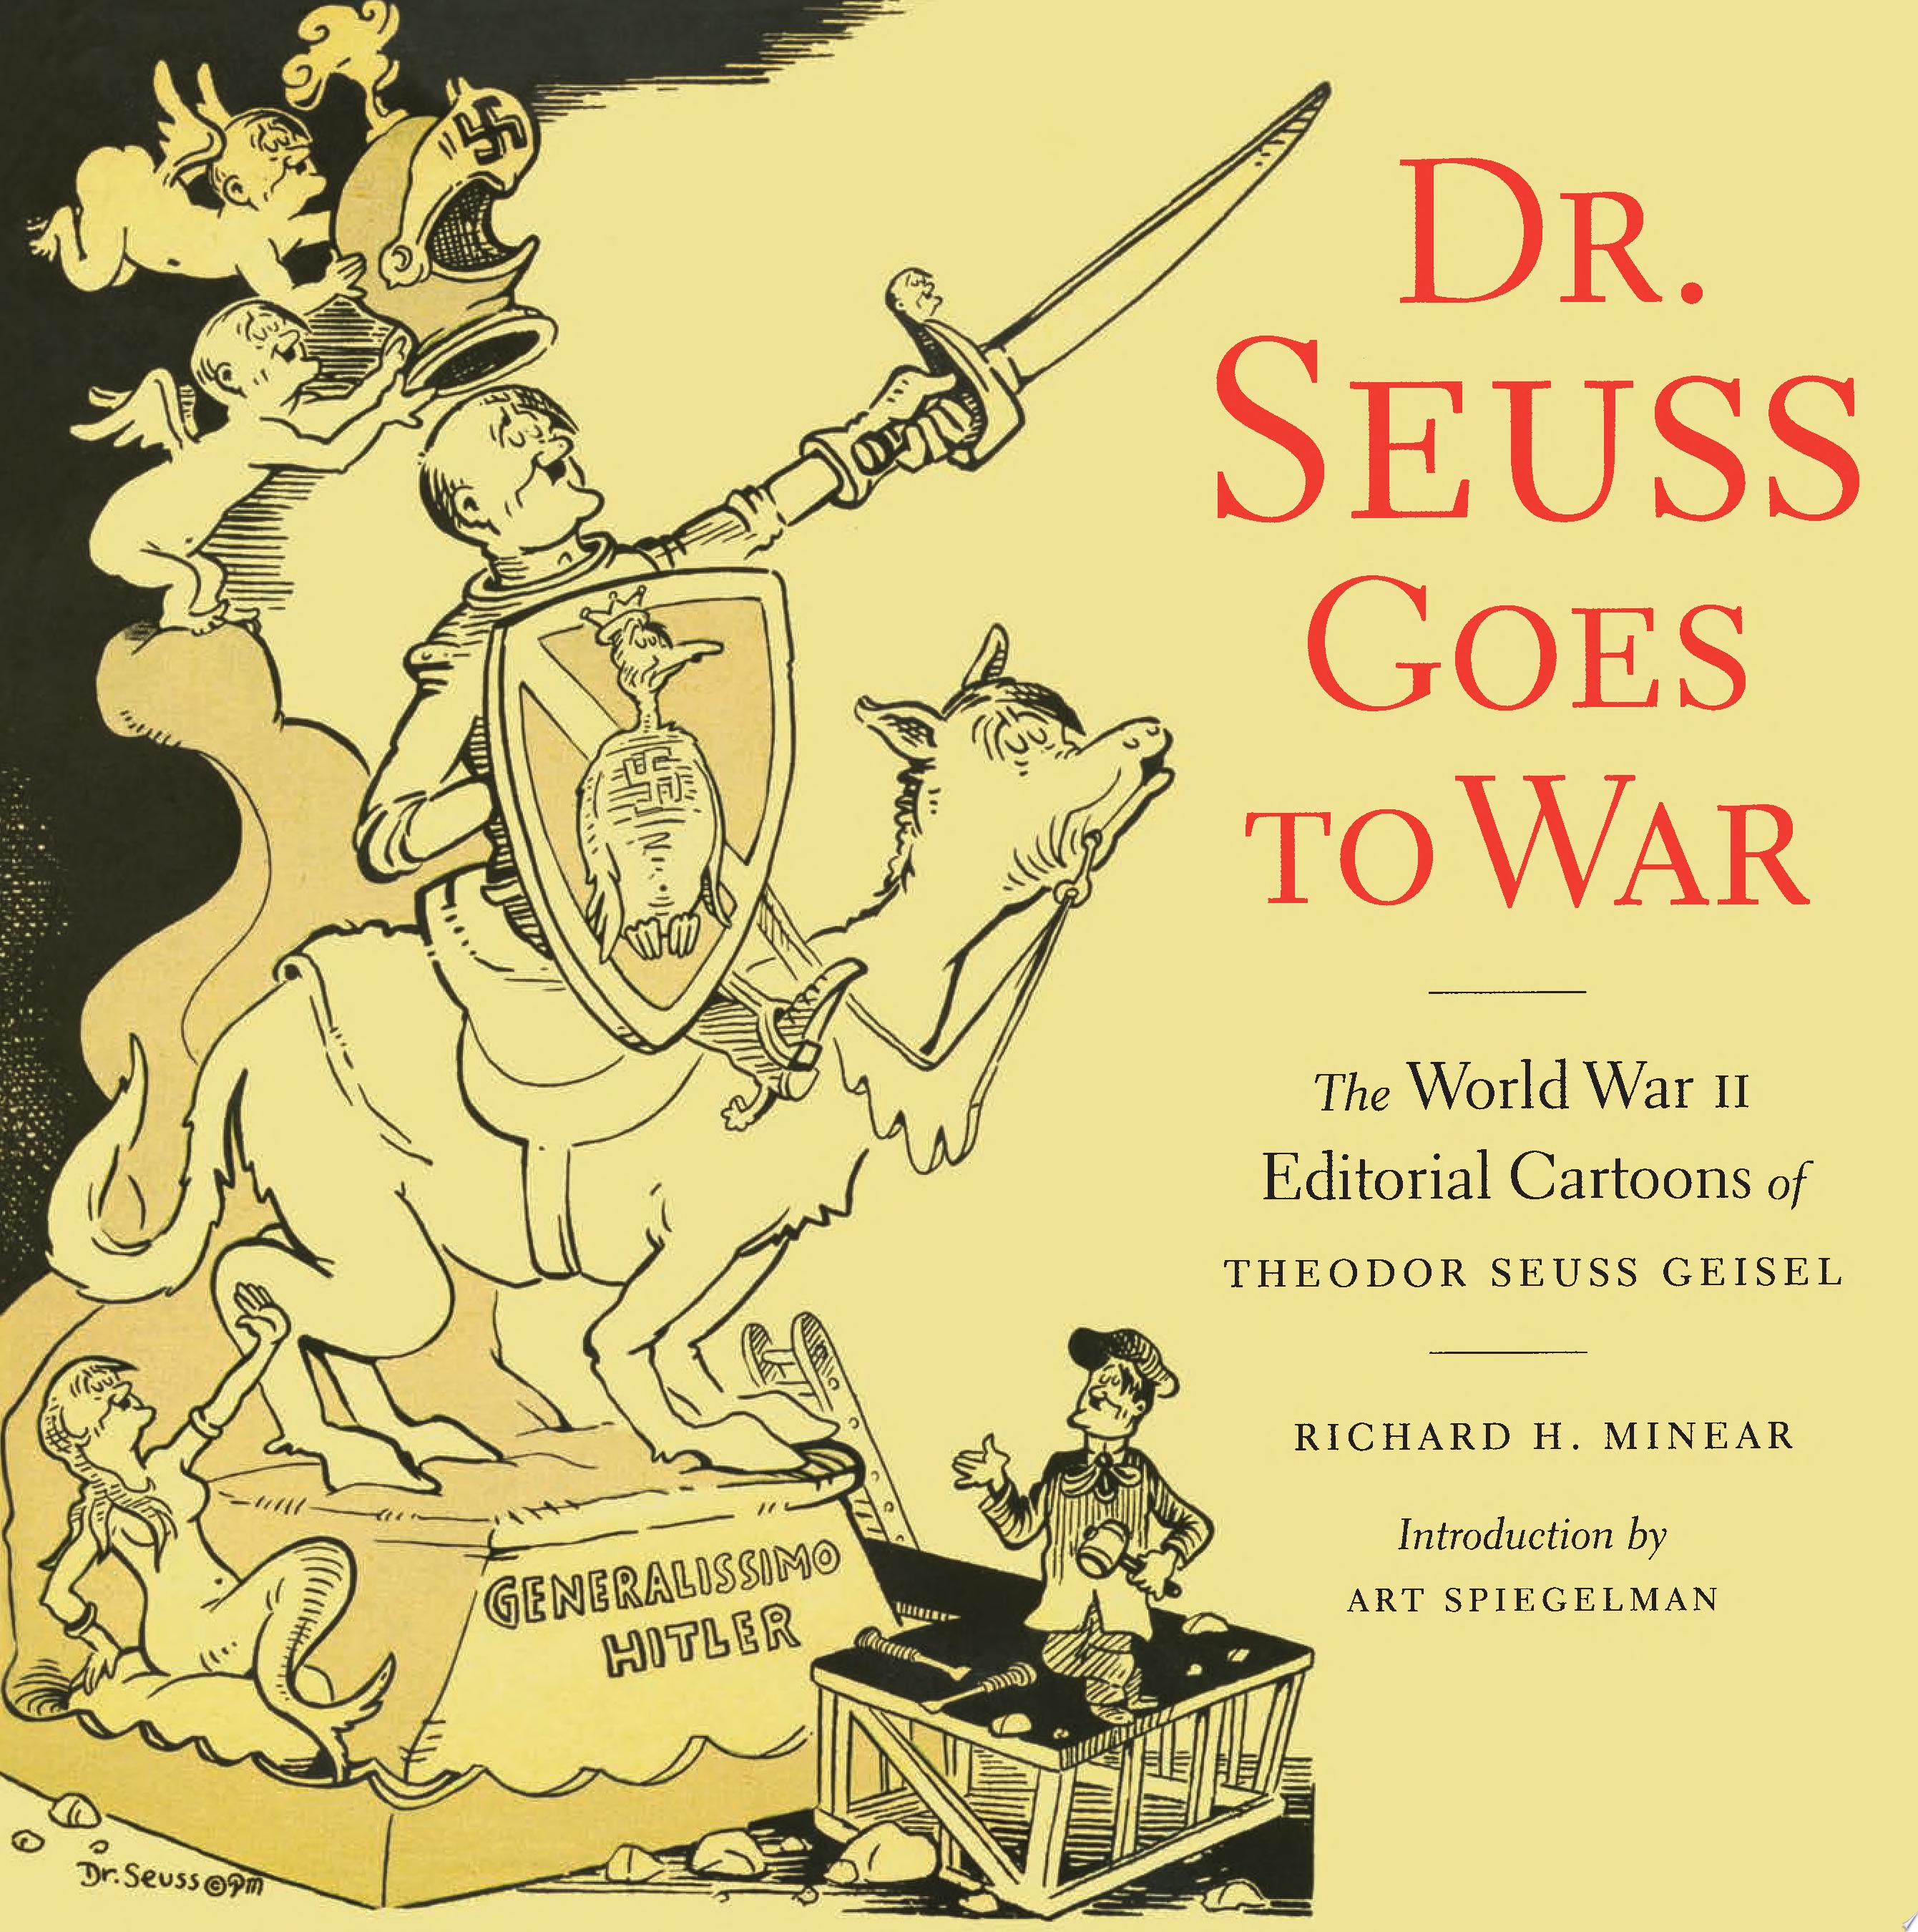 Image for "Dr. Seuss Goes to War"